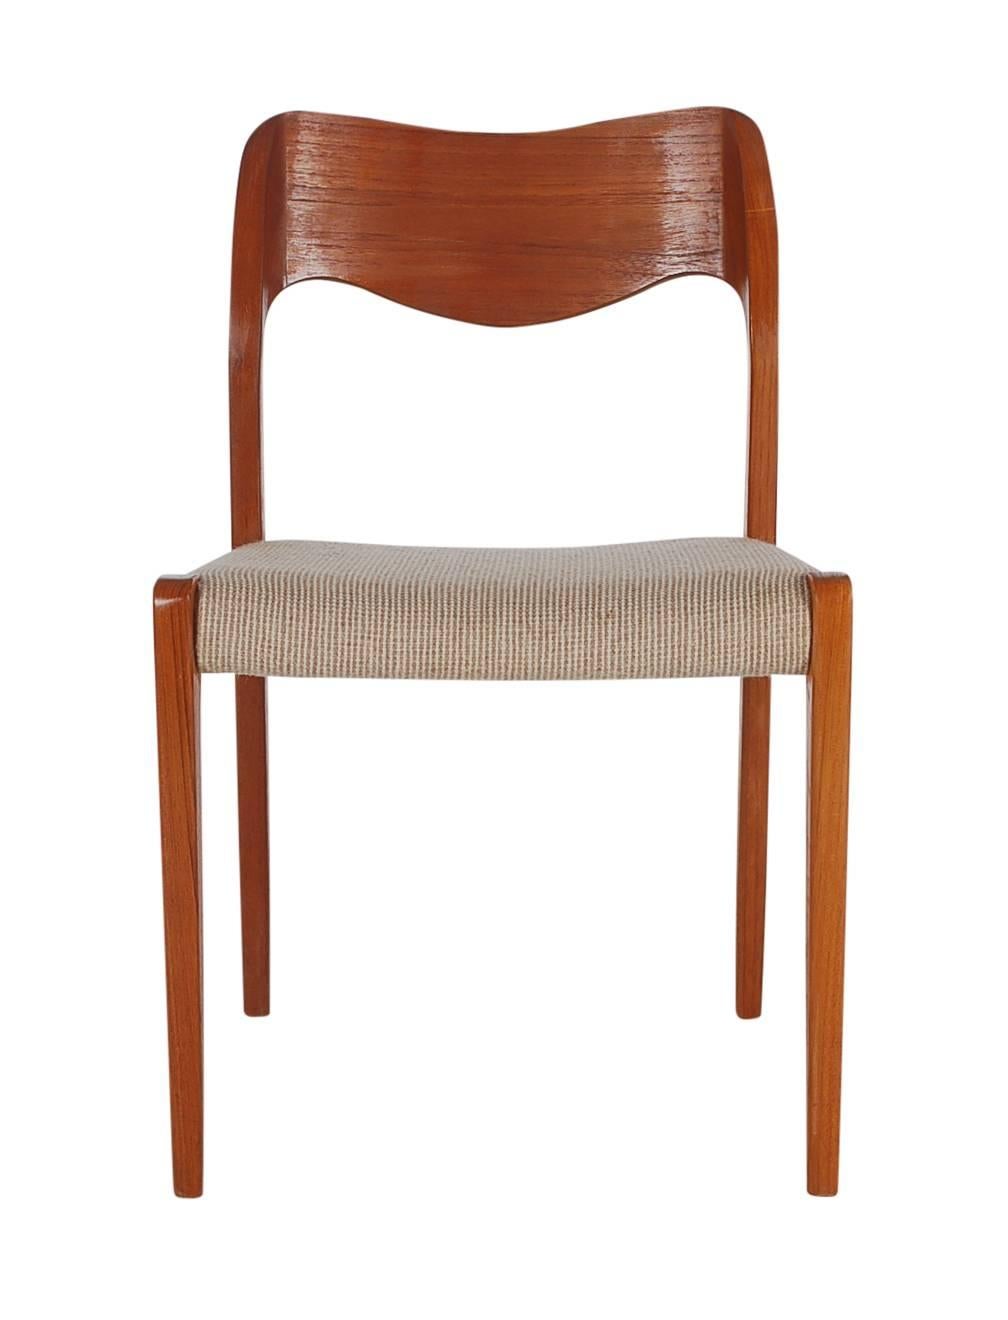 One of my favourite designs; a handsome looking dining chair designed by Niels O. Møller. The chair features solid teak construction with original fabric seats, circa 1960s.